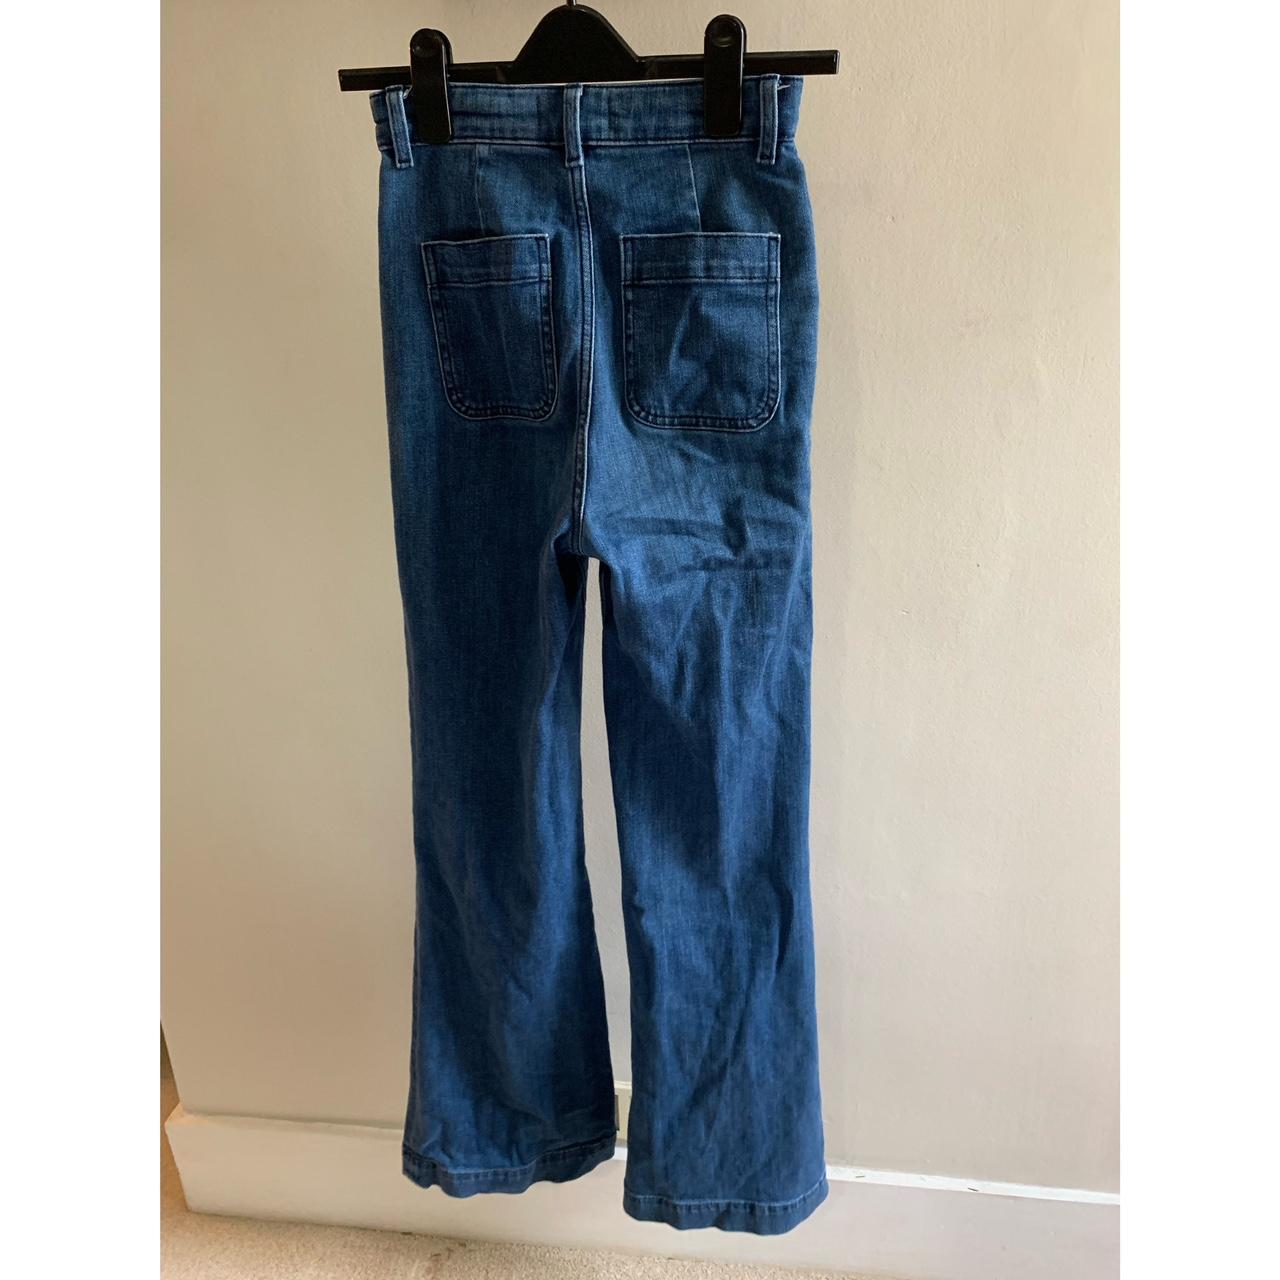  Other Stories flared jeans in mid-blue. Have loved - Depop